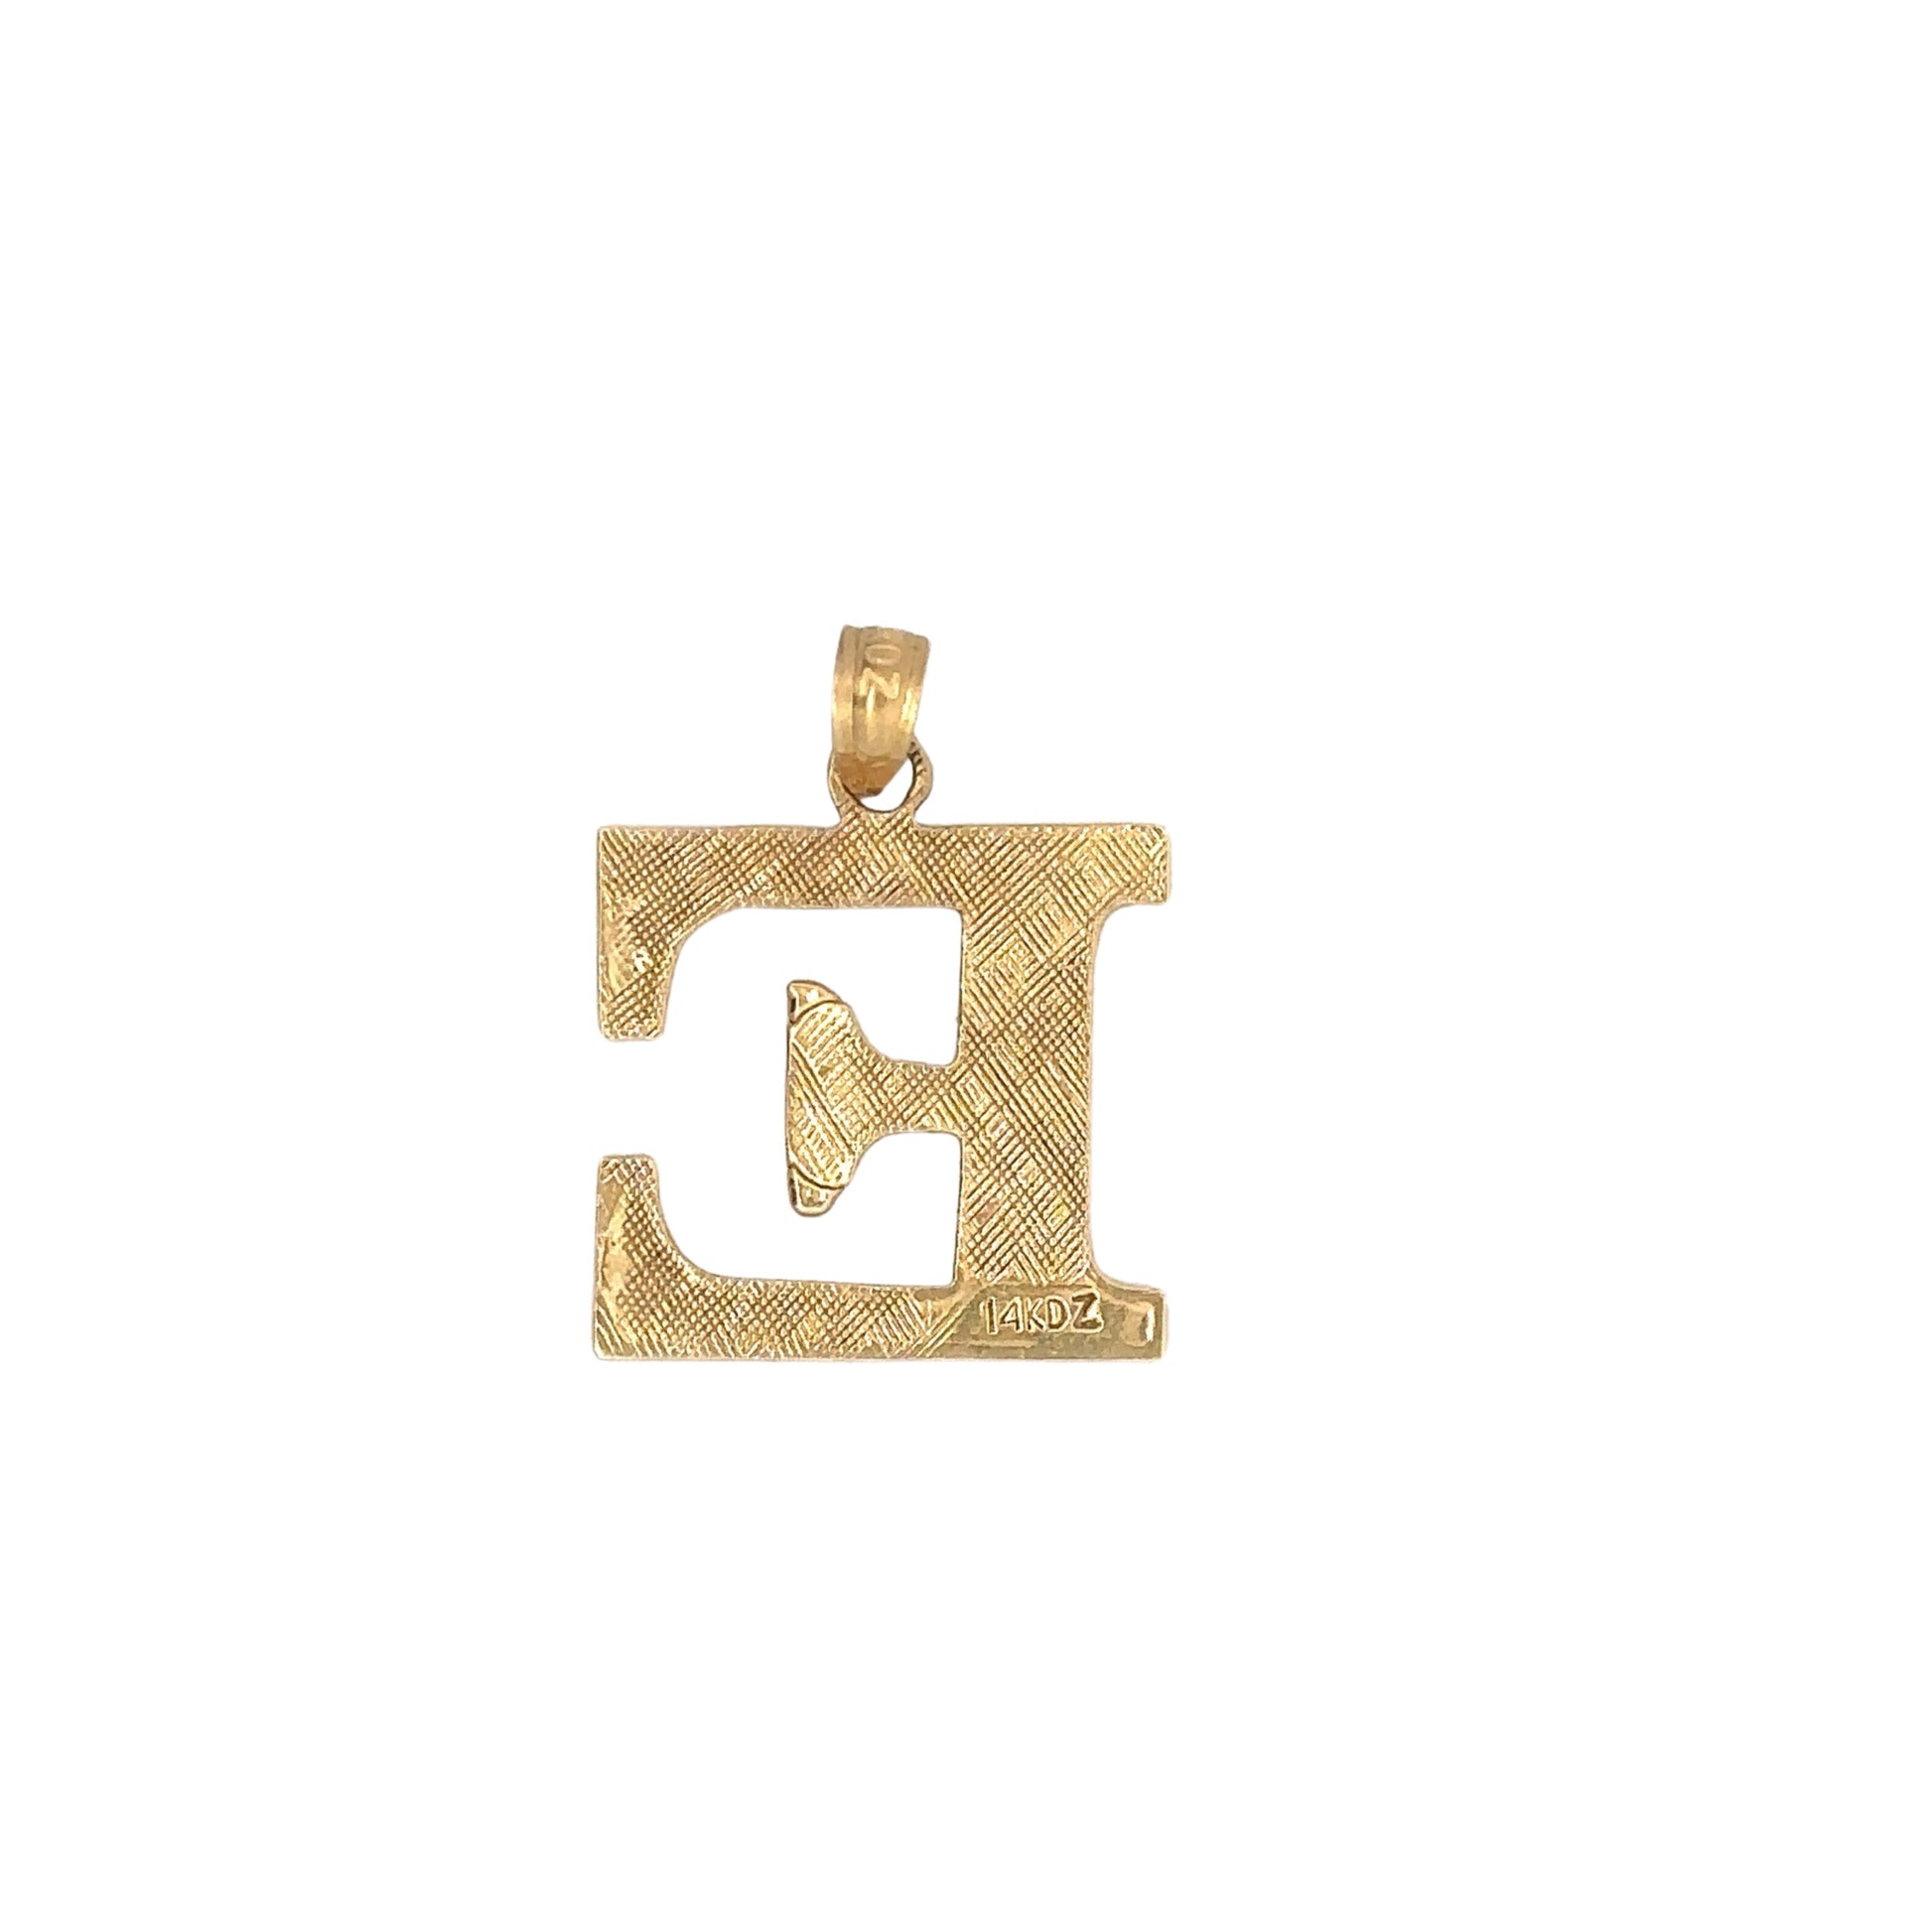 Back of E pendant with 14K stamp